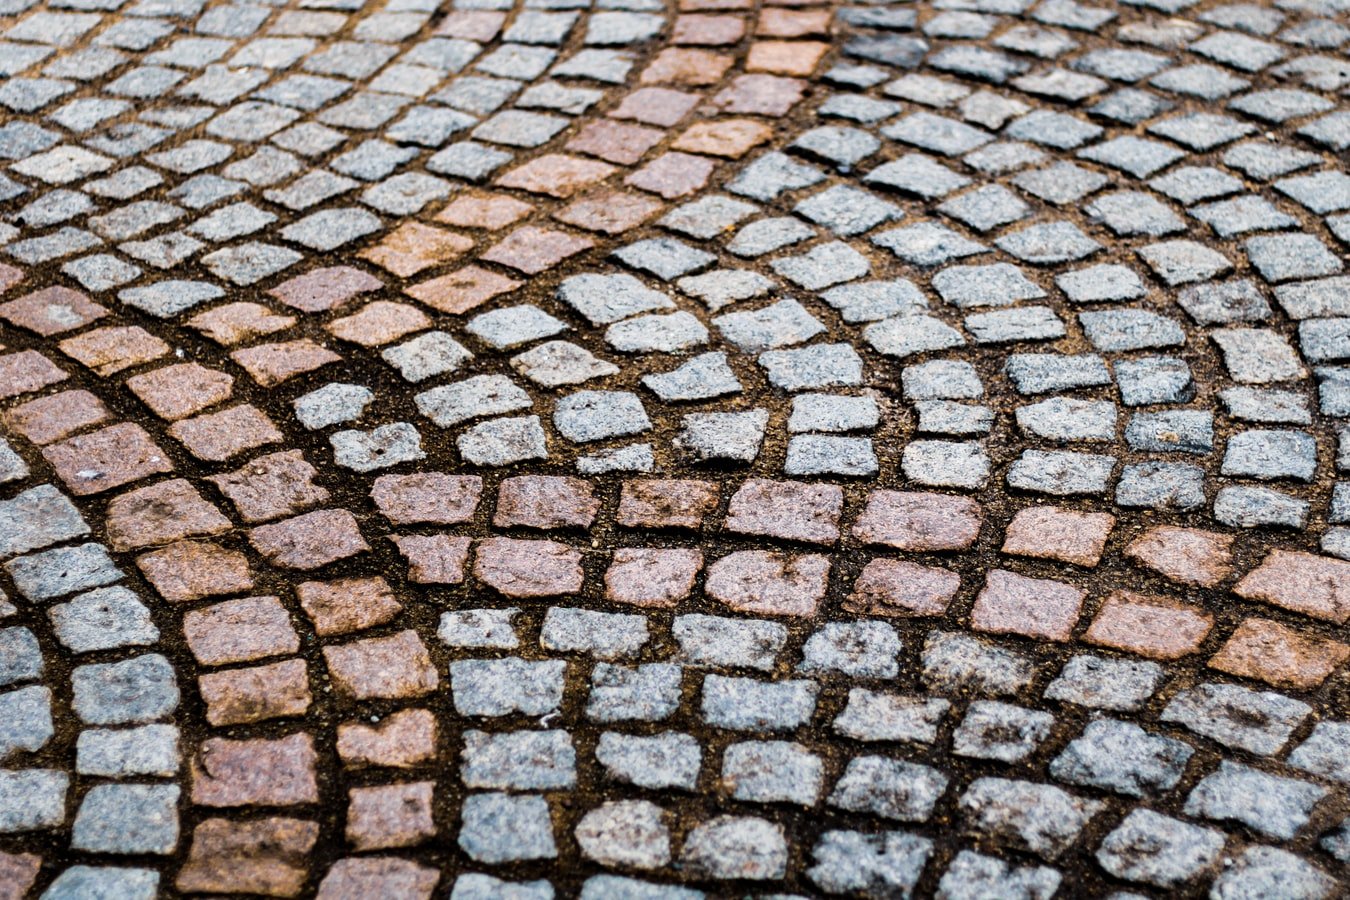 Are You In Need Of Commercial Block Paving Cleaning In Northamptonshire?